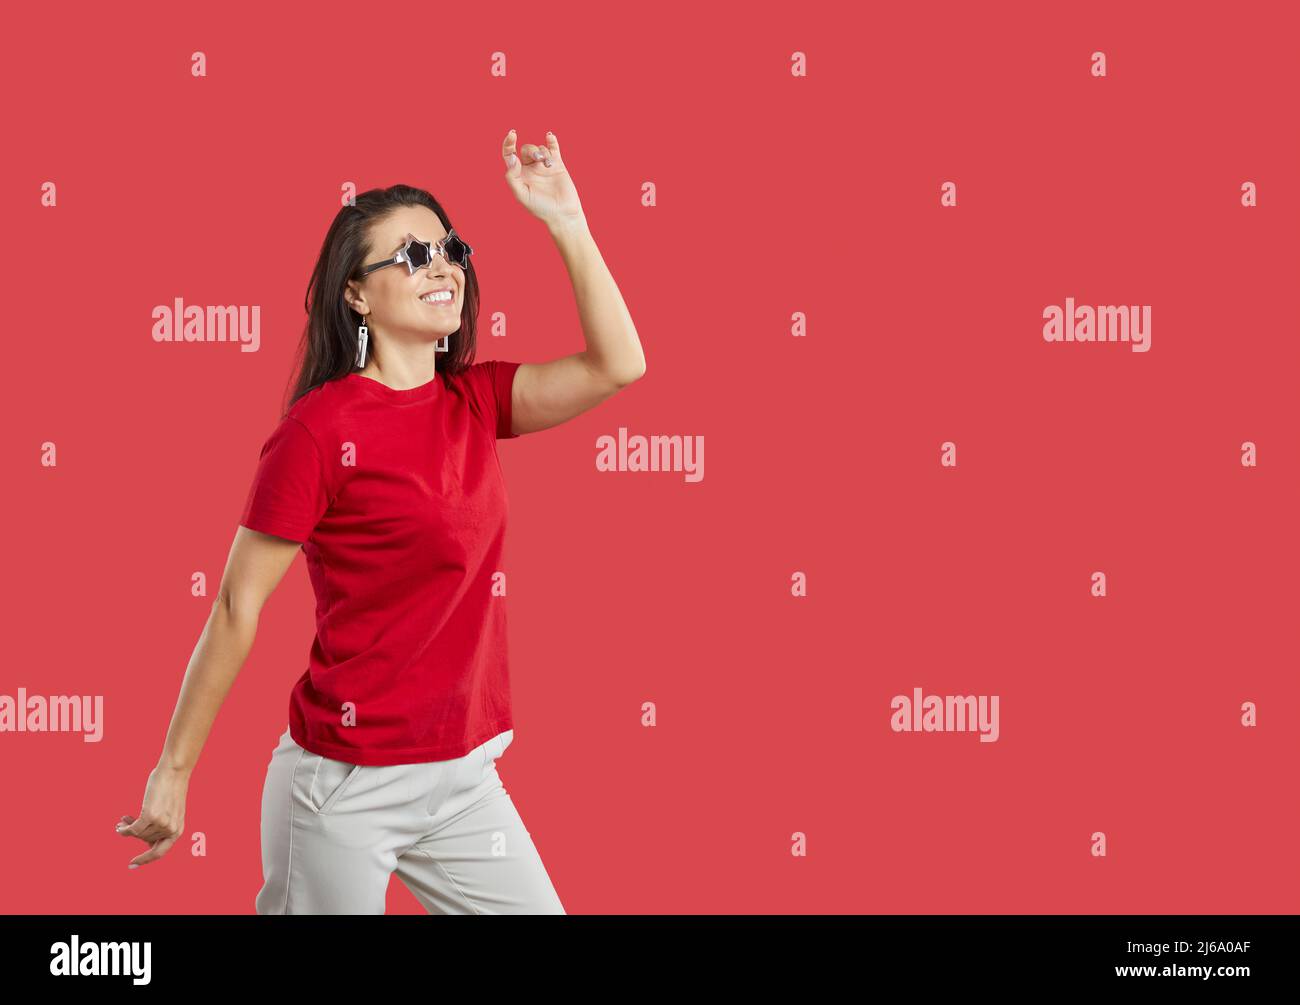 Cheerful positive woman in funny glasses with stars isolated on vivid red background. Stock Photo